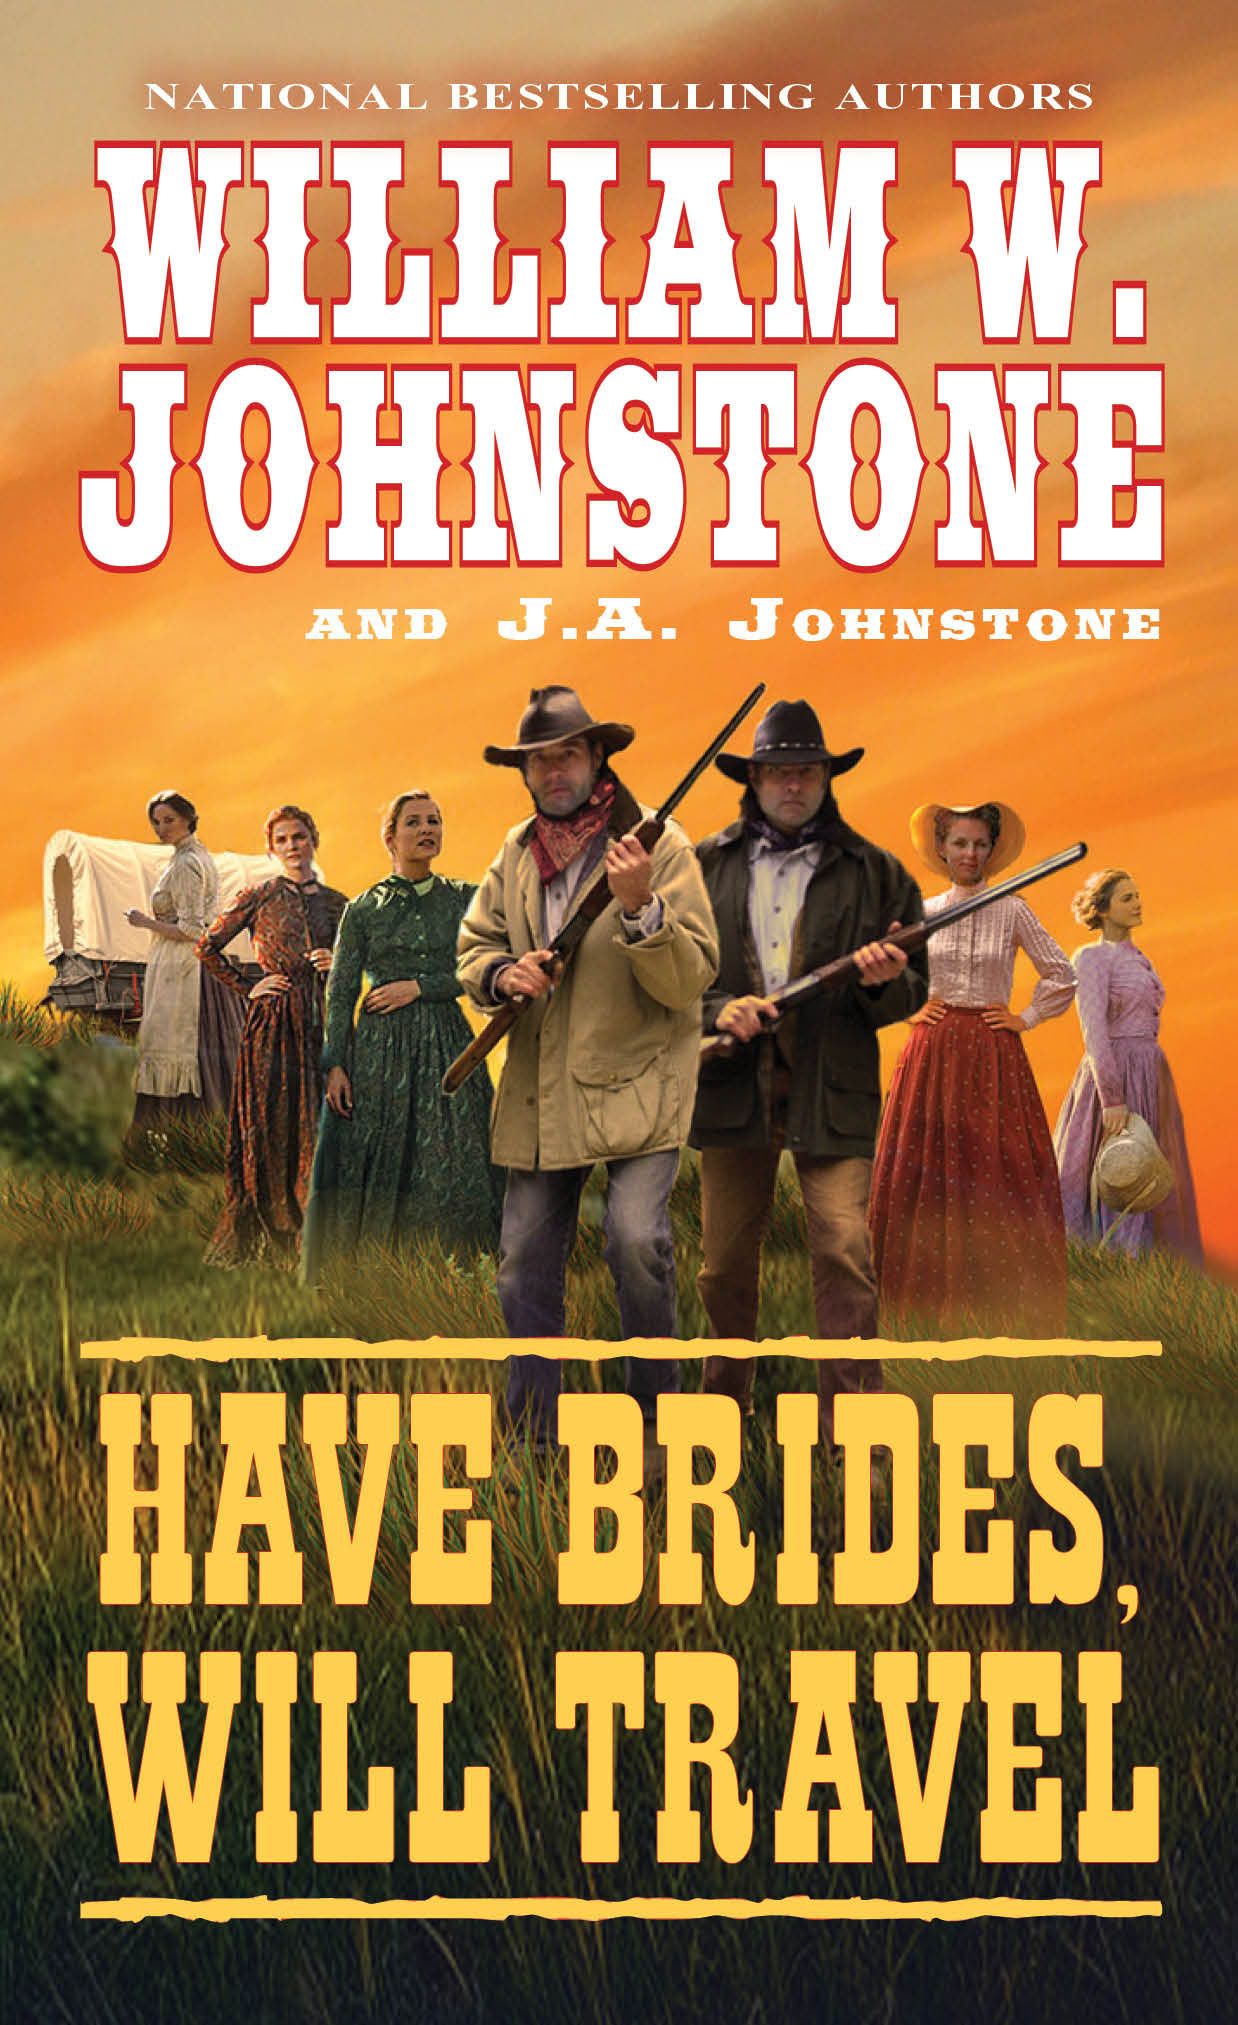 HAVE BRIDES, WILL TRAVEL by William W. Johnstone & J.A. Johnstone